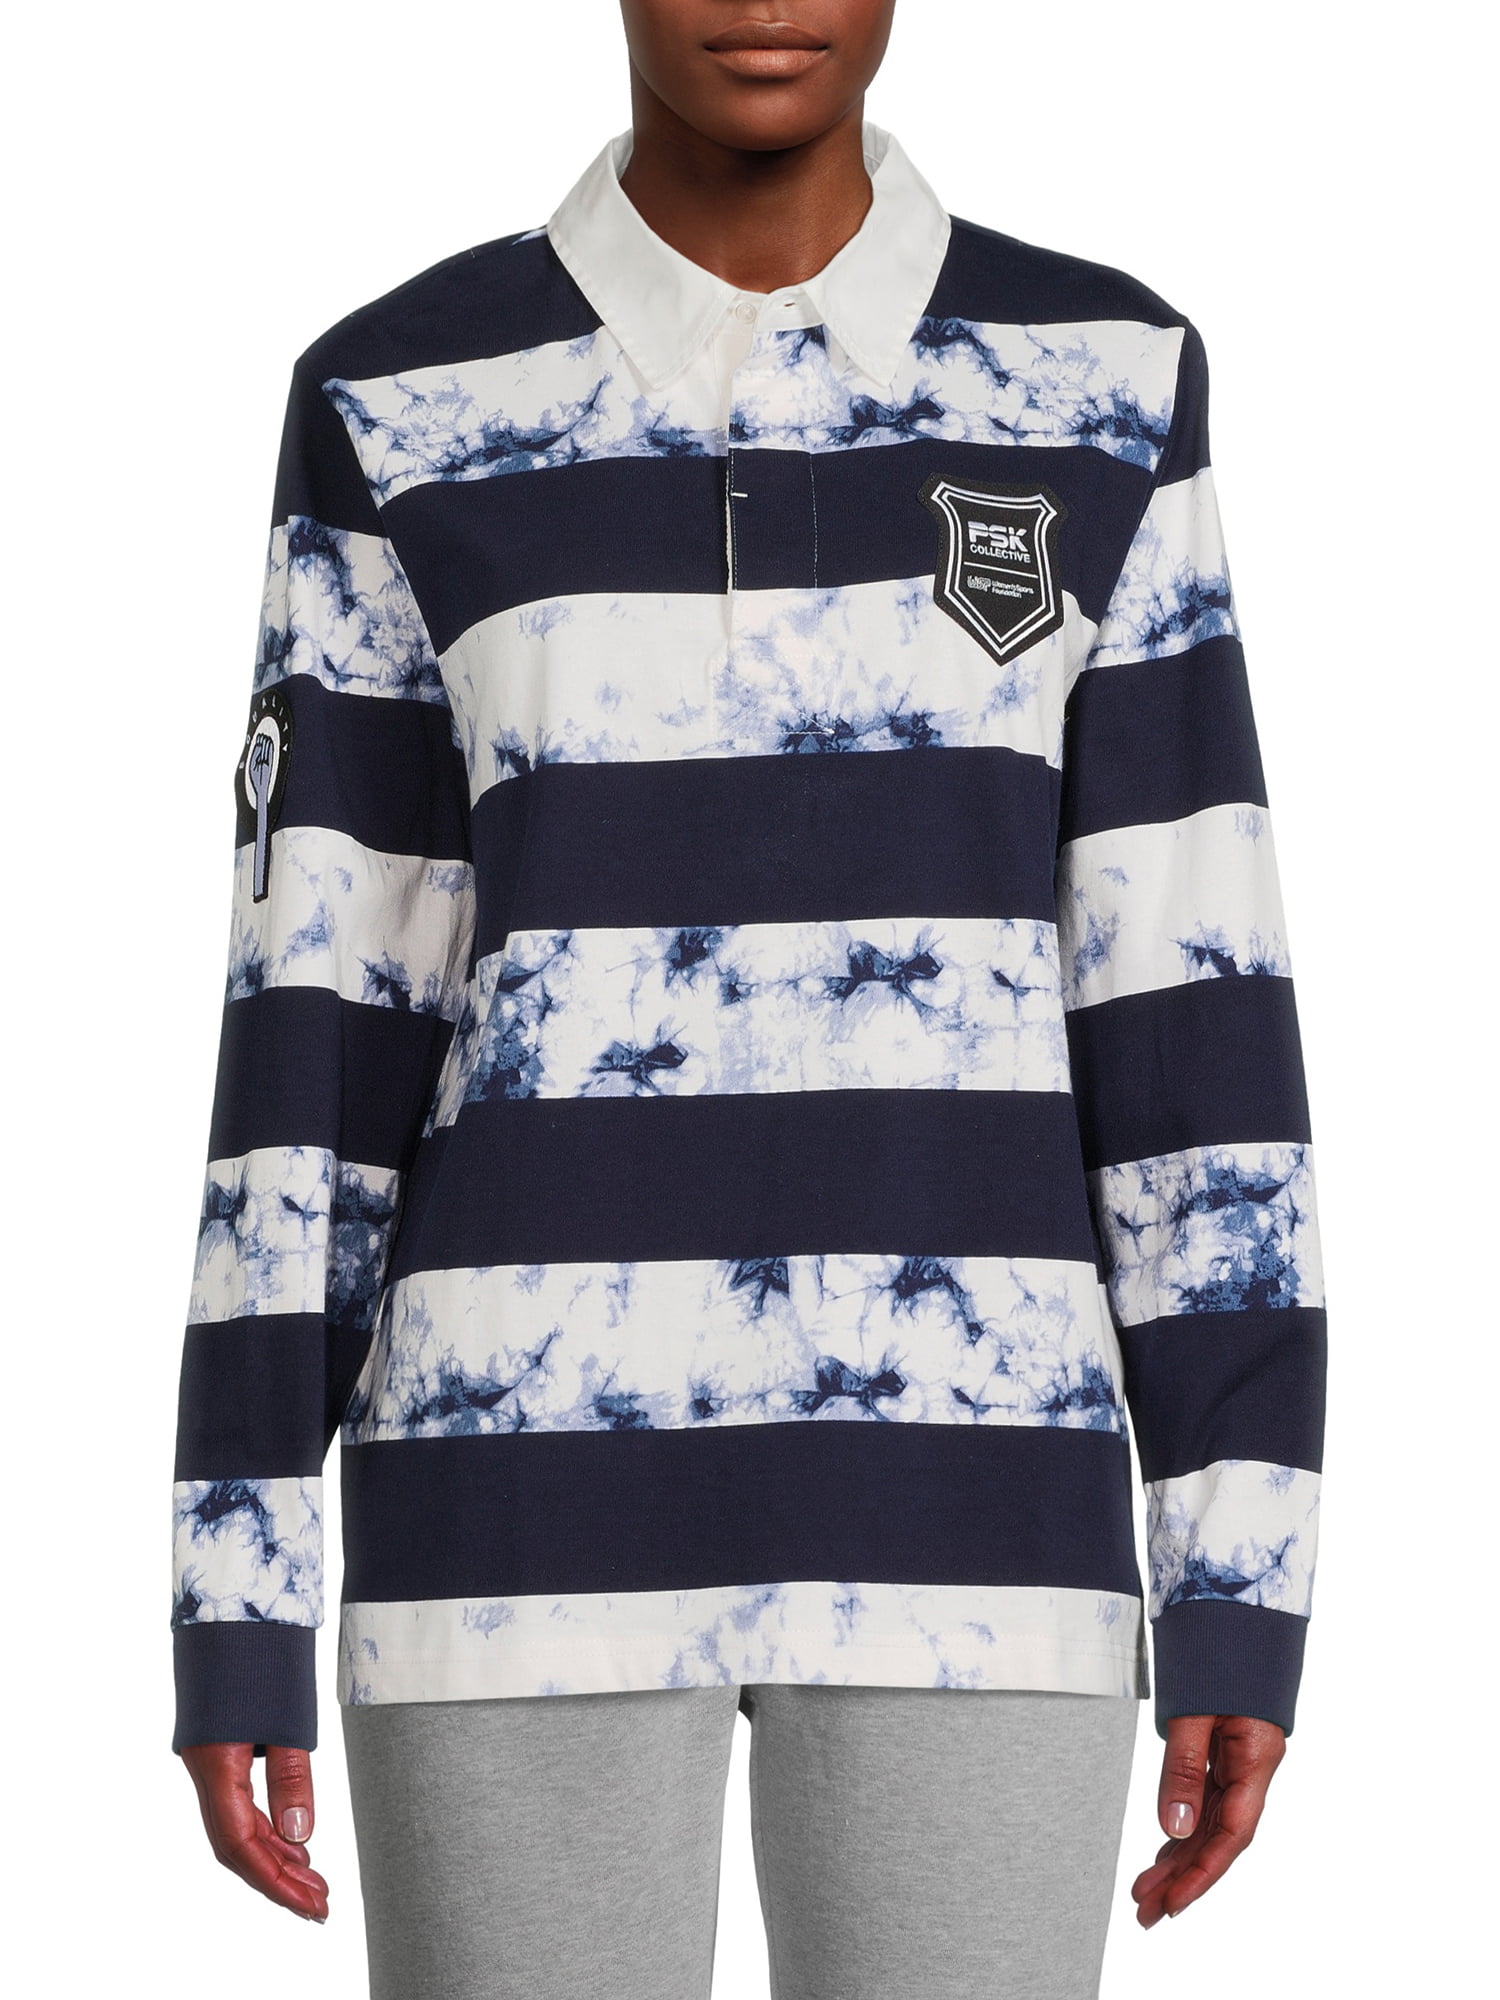 PSK Collective Rugby Equality Patch Collared Tie Dye Top (Women) Size: XXL  PSK X WSF Partnership Sleeve Patch 